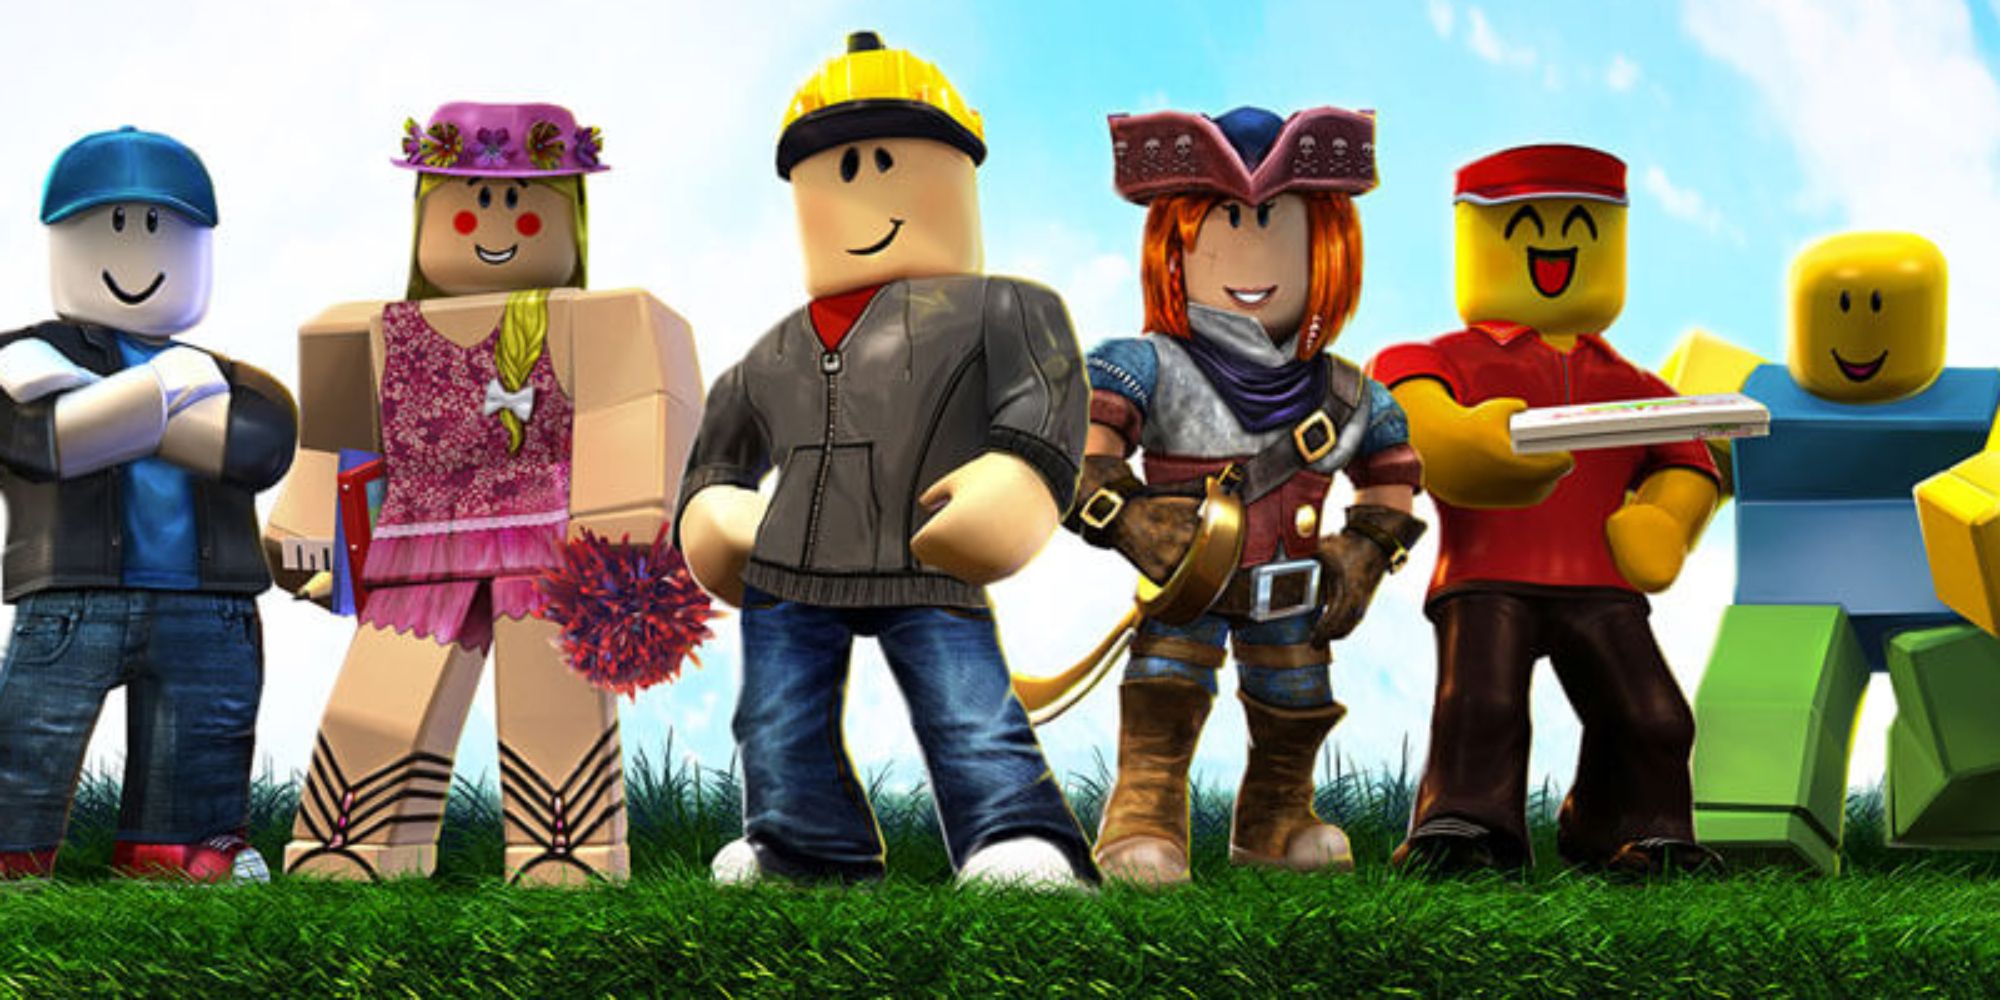 a group of official roblox avatars includign a cheerleader, a construction worker, a pirate, and a pizza deliveryperson